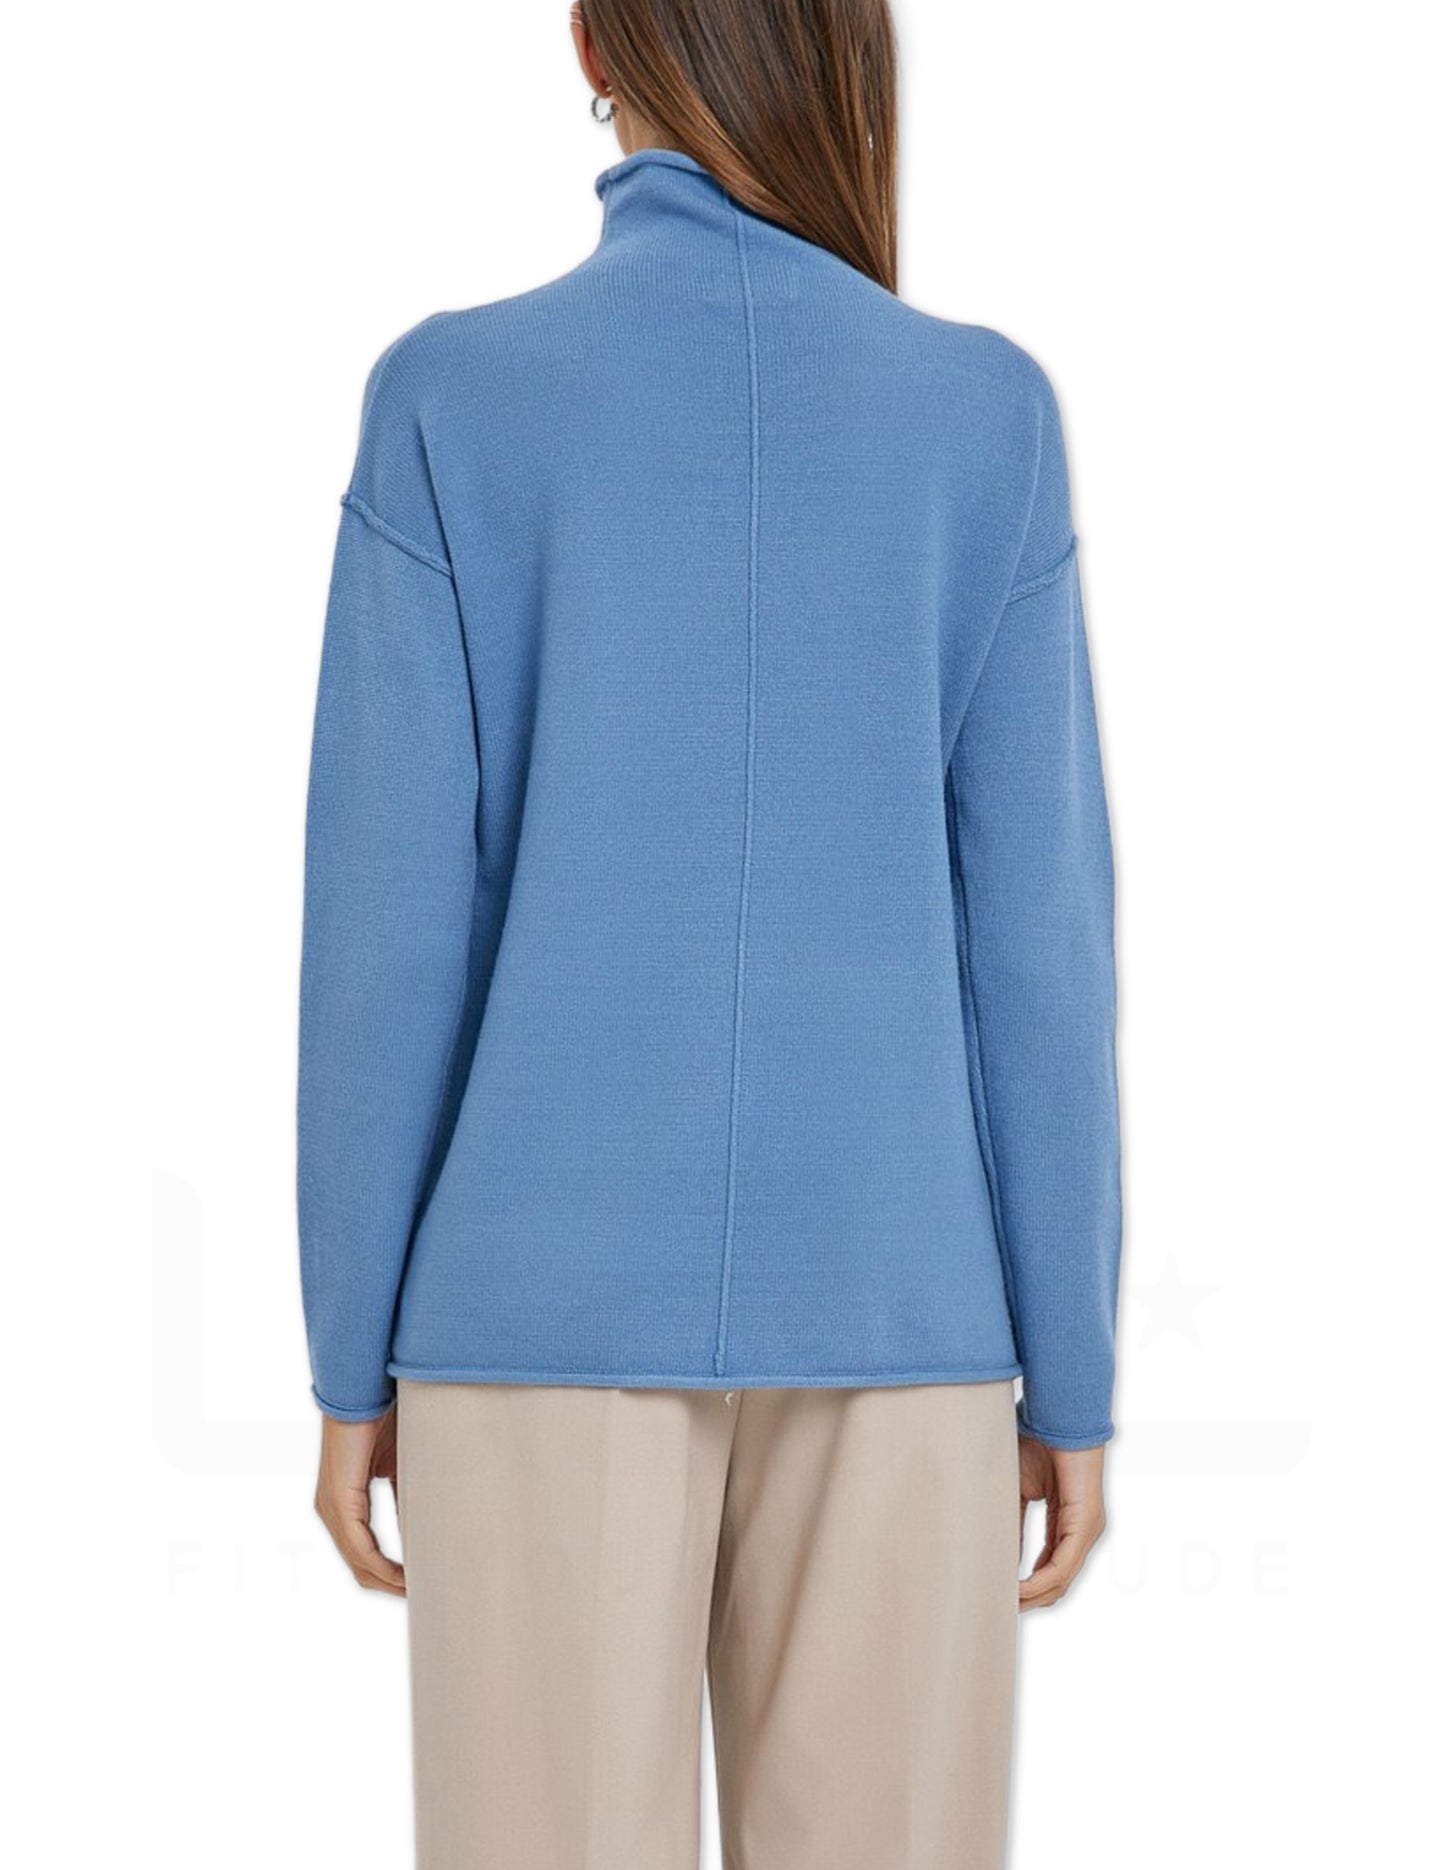 The Halle Sweater - Blue